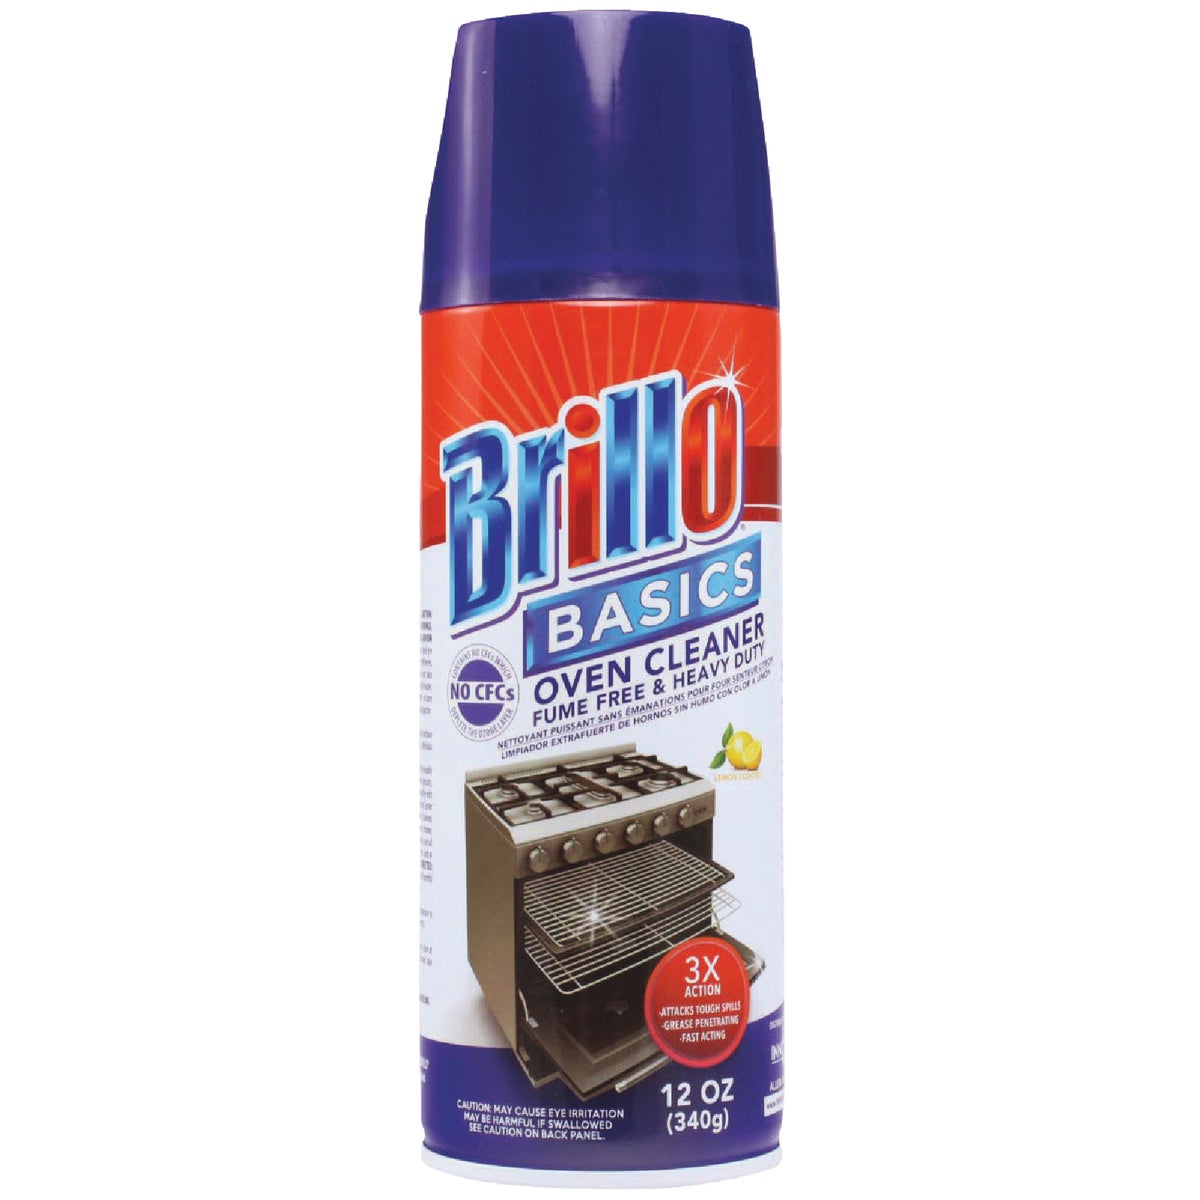 Item 623636, Heavy-duty oven cleaner. Ideal for deep cleaning jobs. Fume free formula.